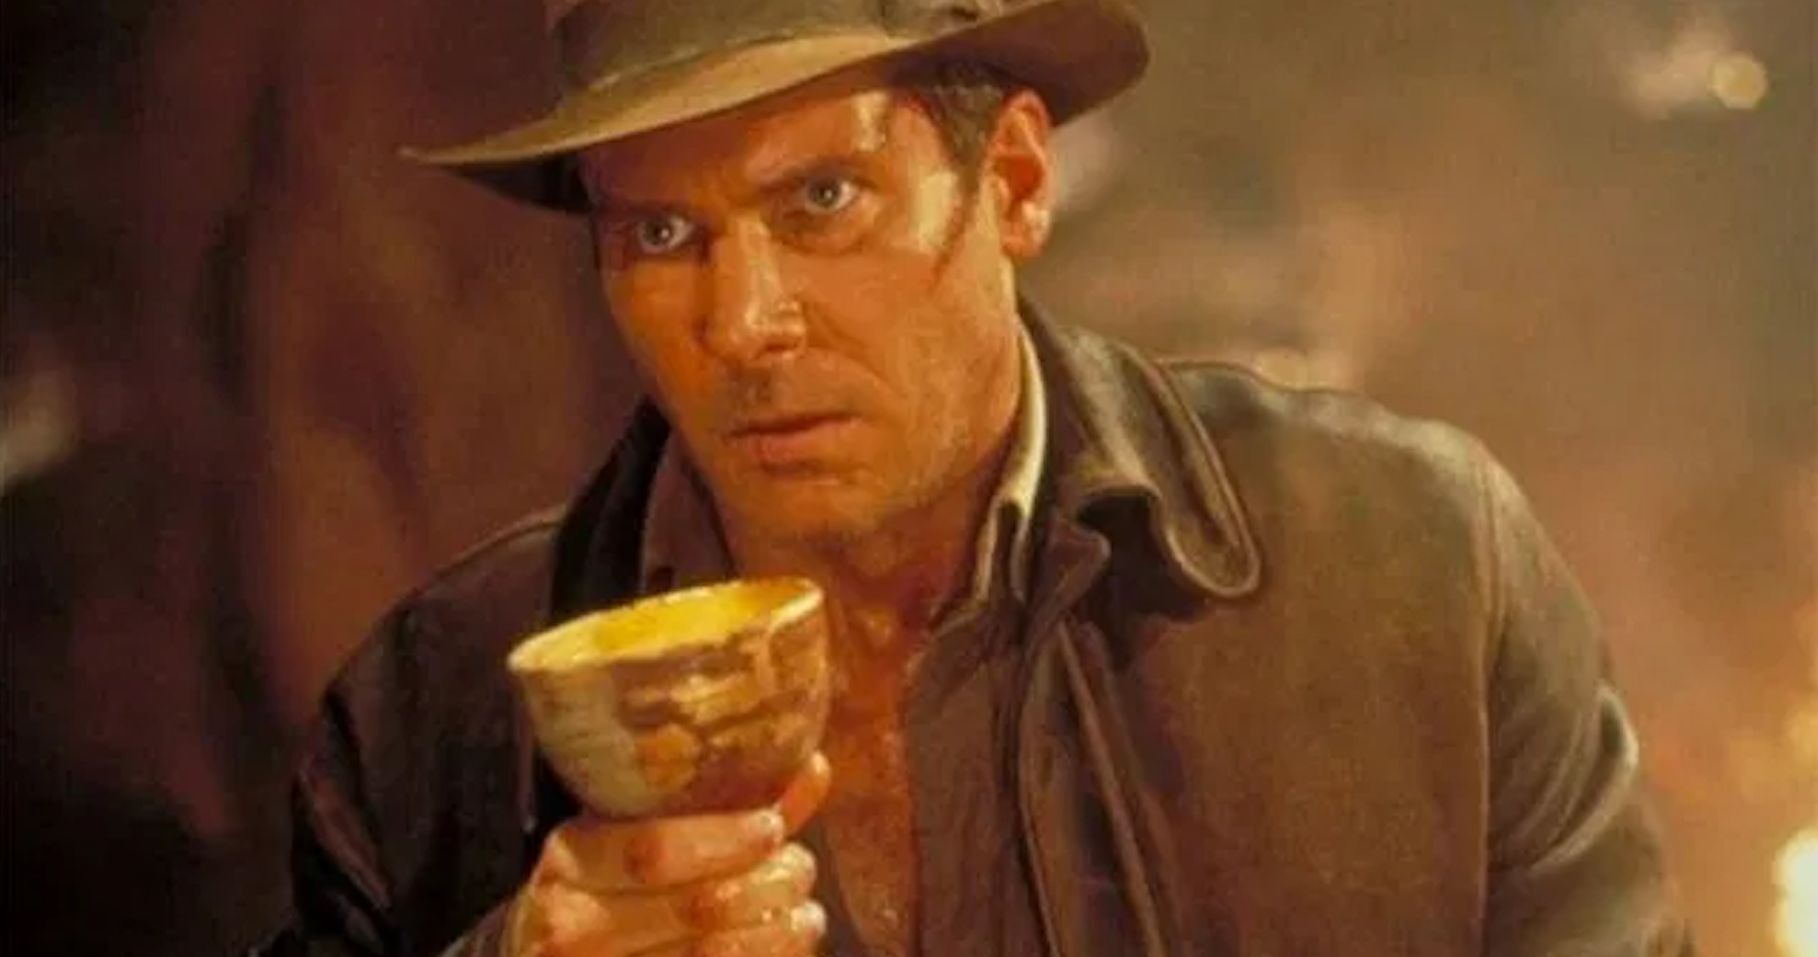 Indiana Jones 5 Set Photo Strongly Suggest Harrison Ford Will Get De-Aged